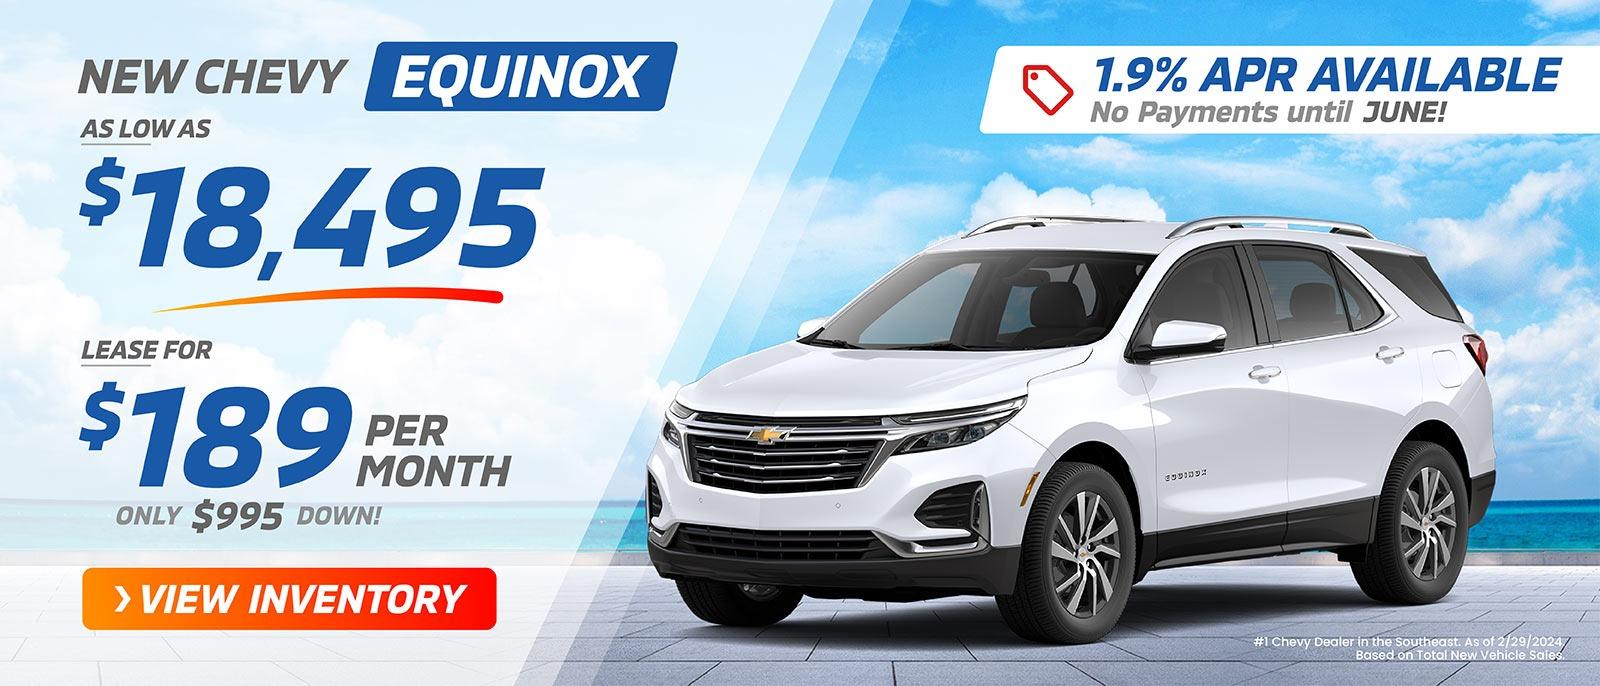 All New Chevy Equinox